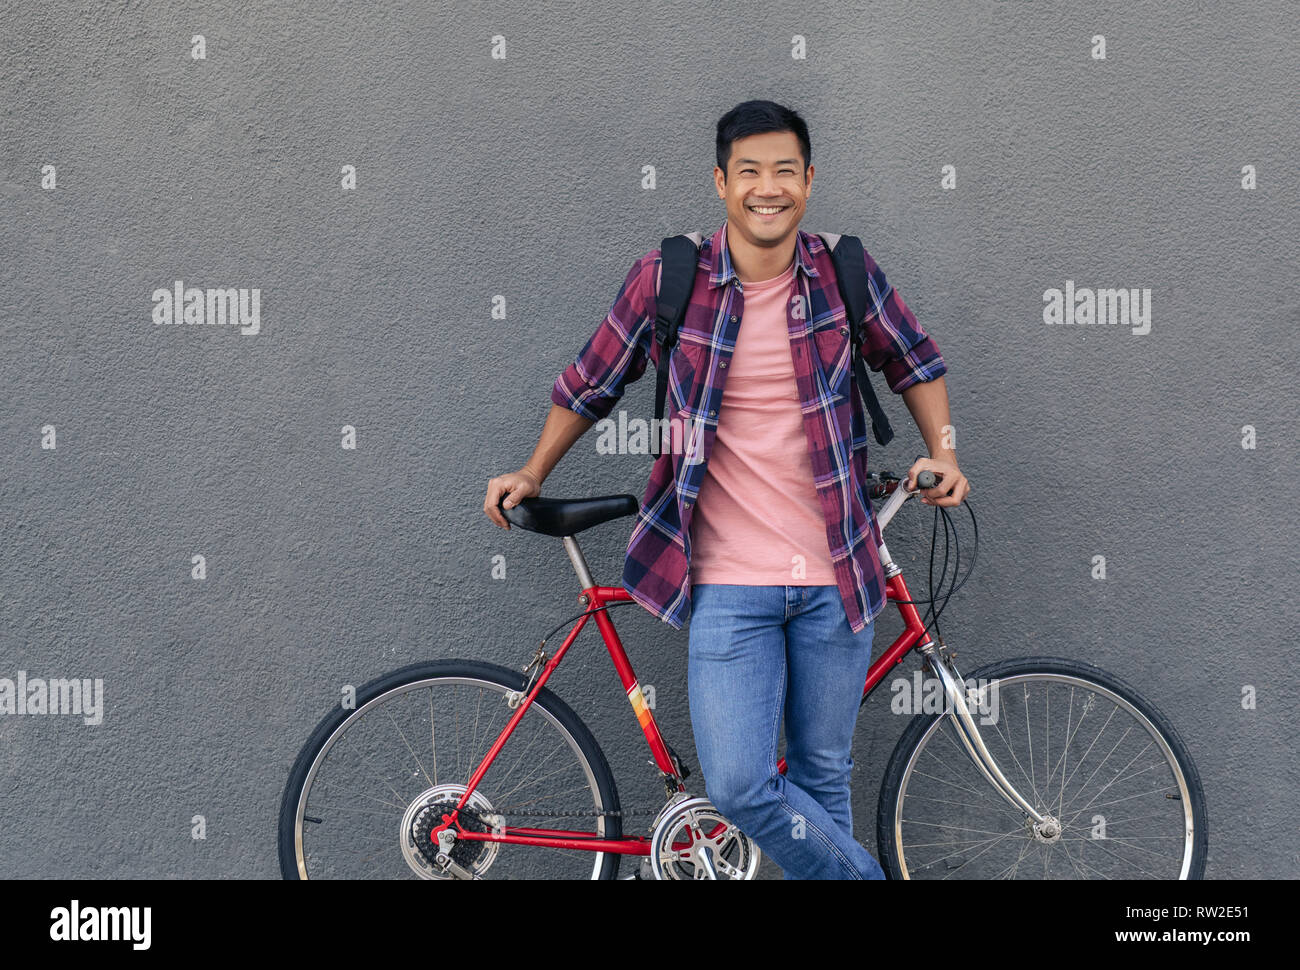 Cool smiling man standing with his bike against a wall Stock Photo